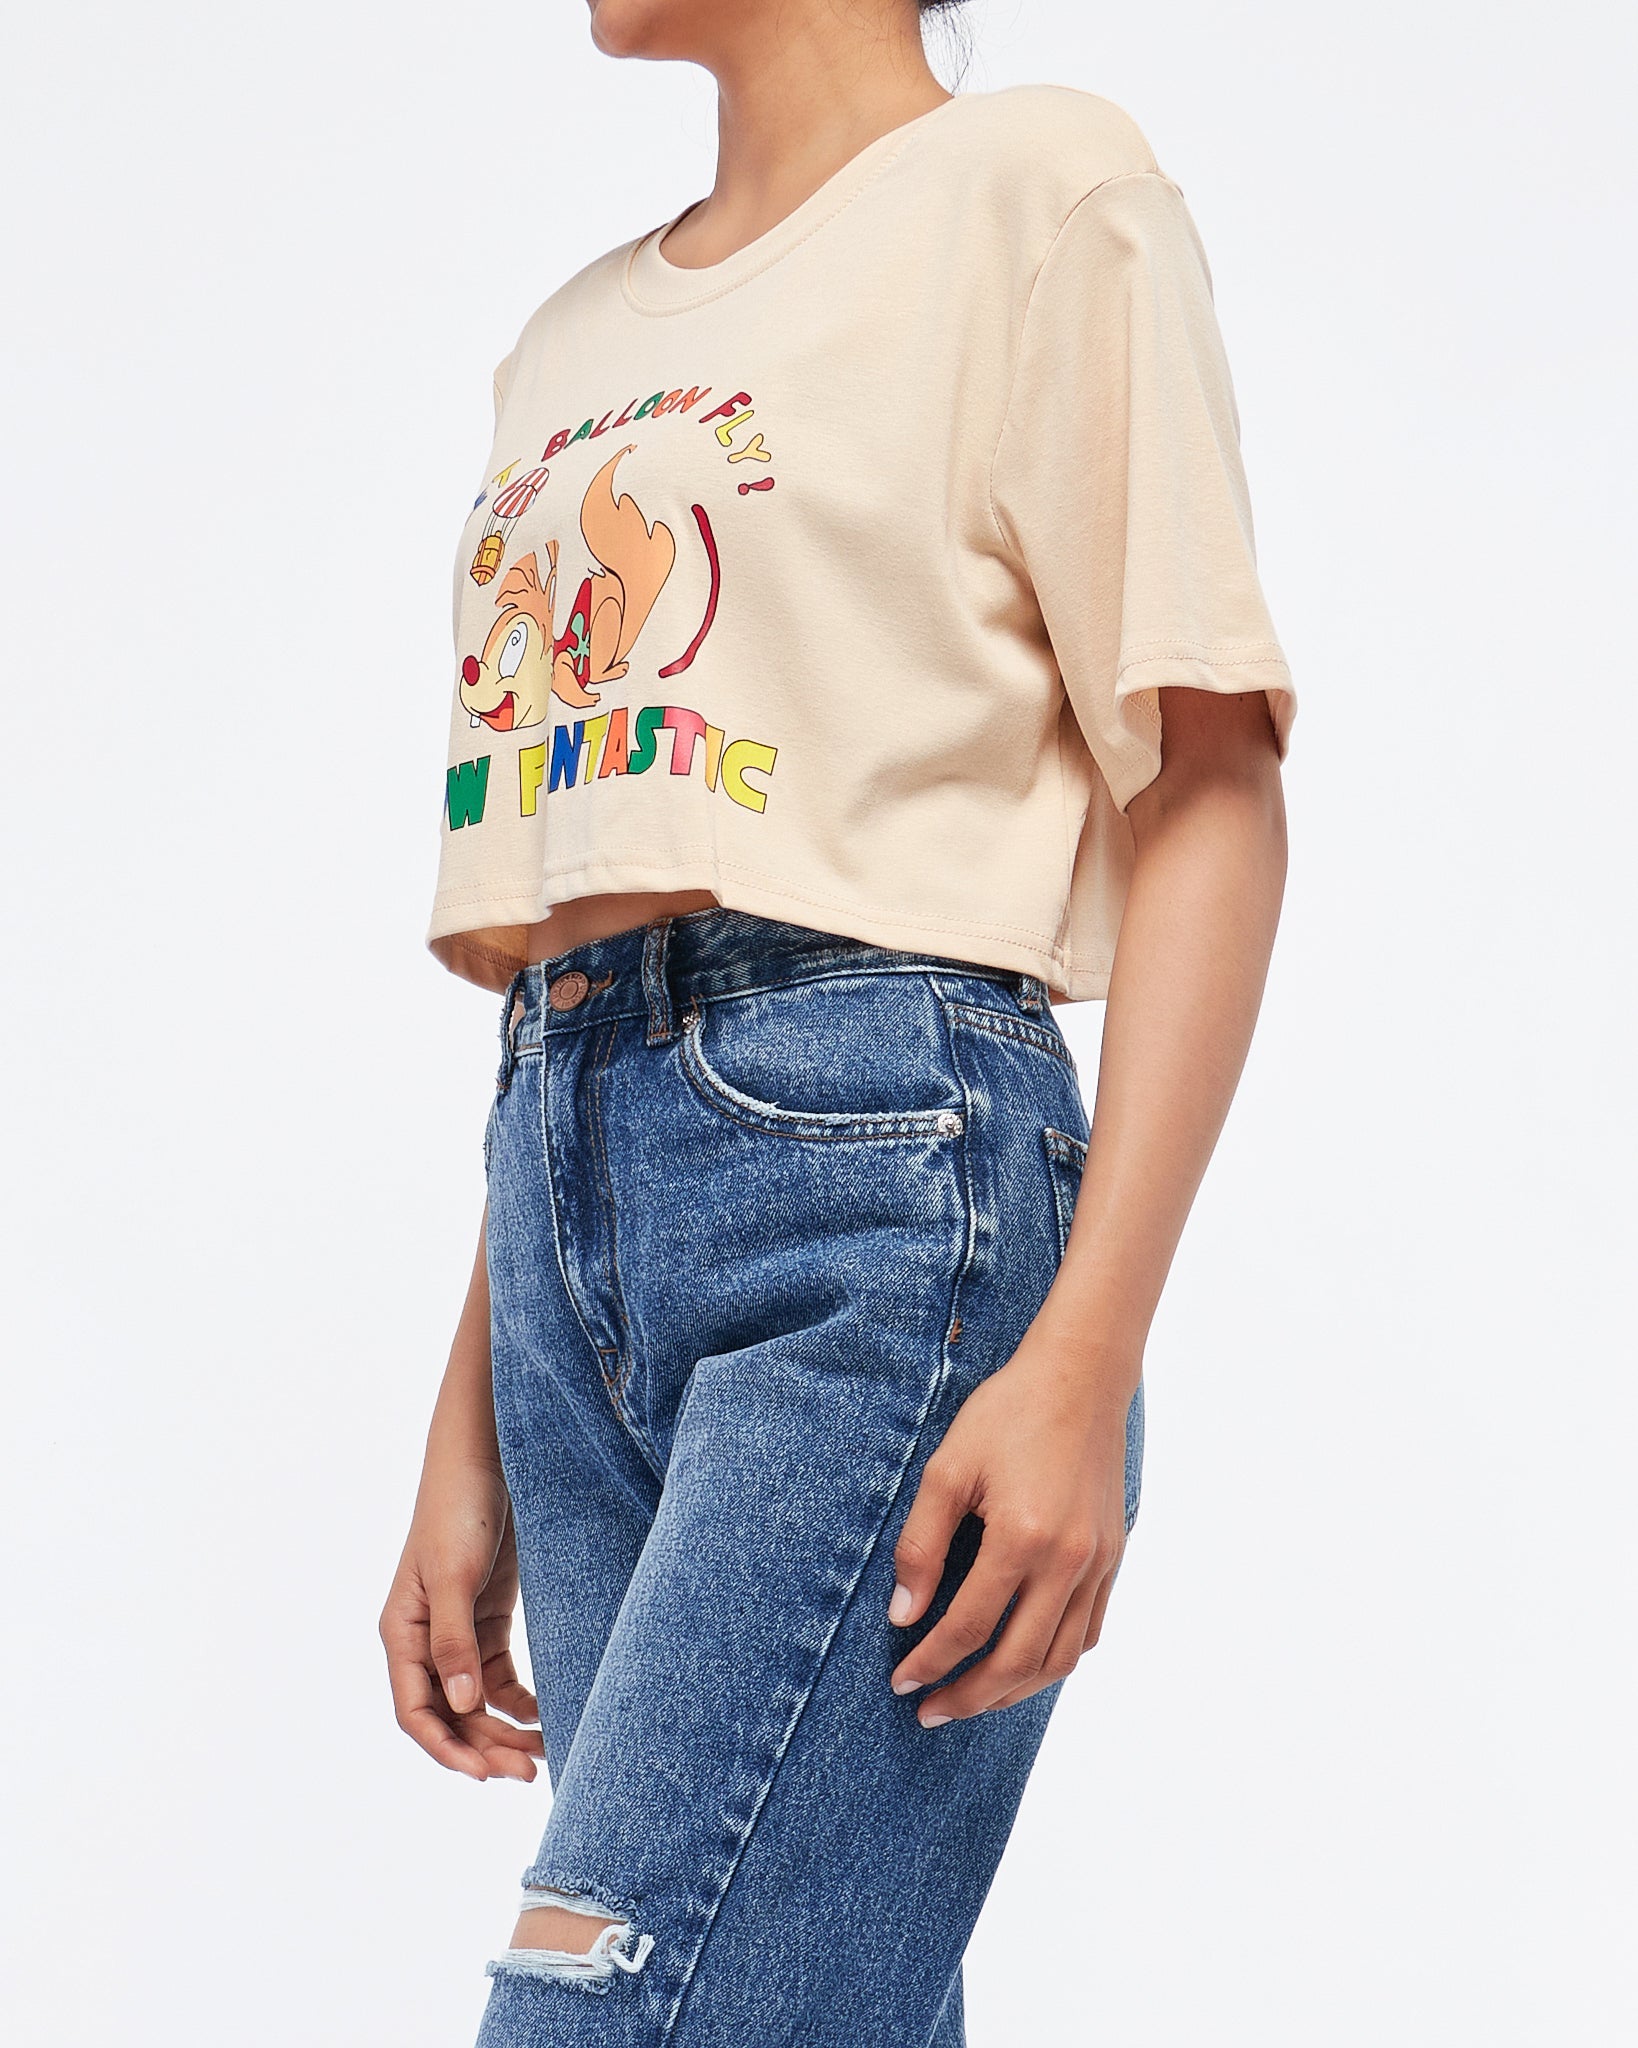 MOI OUTFIT-Squirrel Cartoon Printed Lady Crop Top 9.90